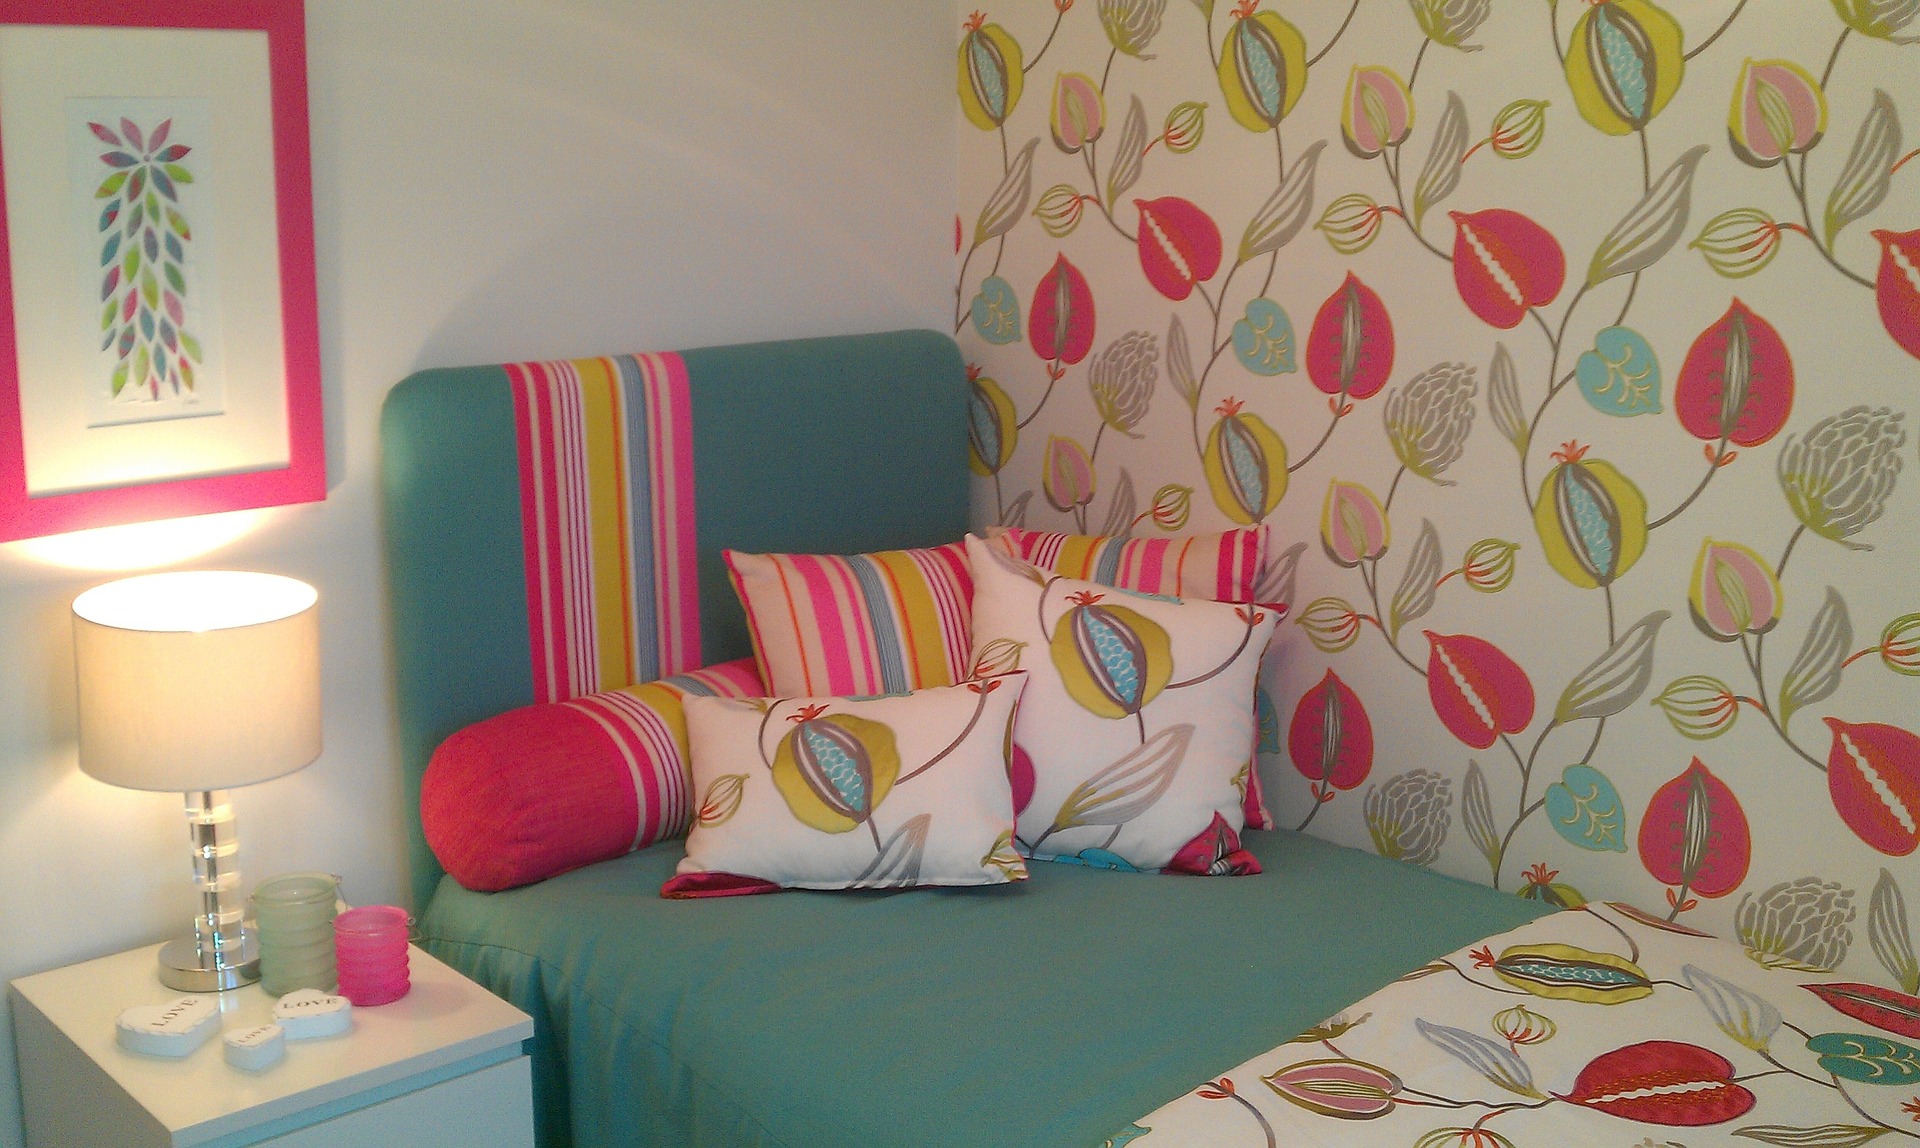 A bed in a room with vibrant wallpaper decor.